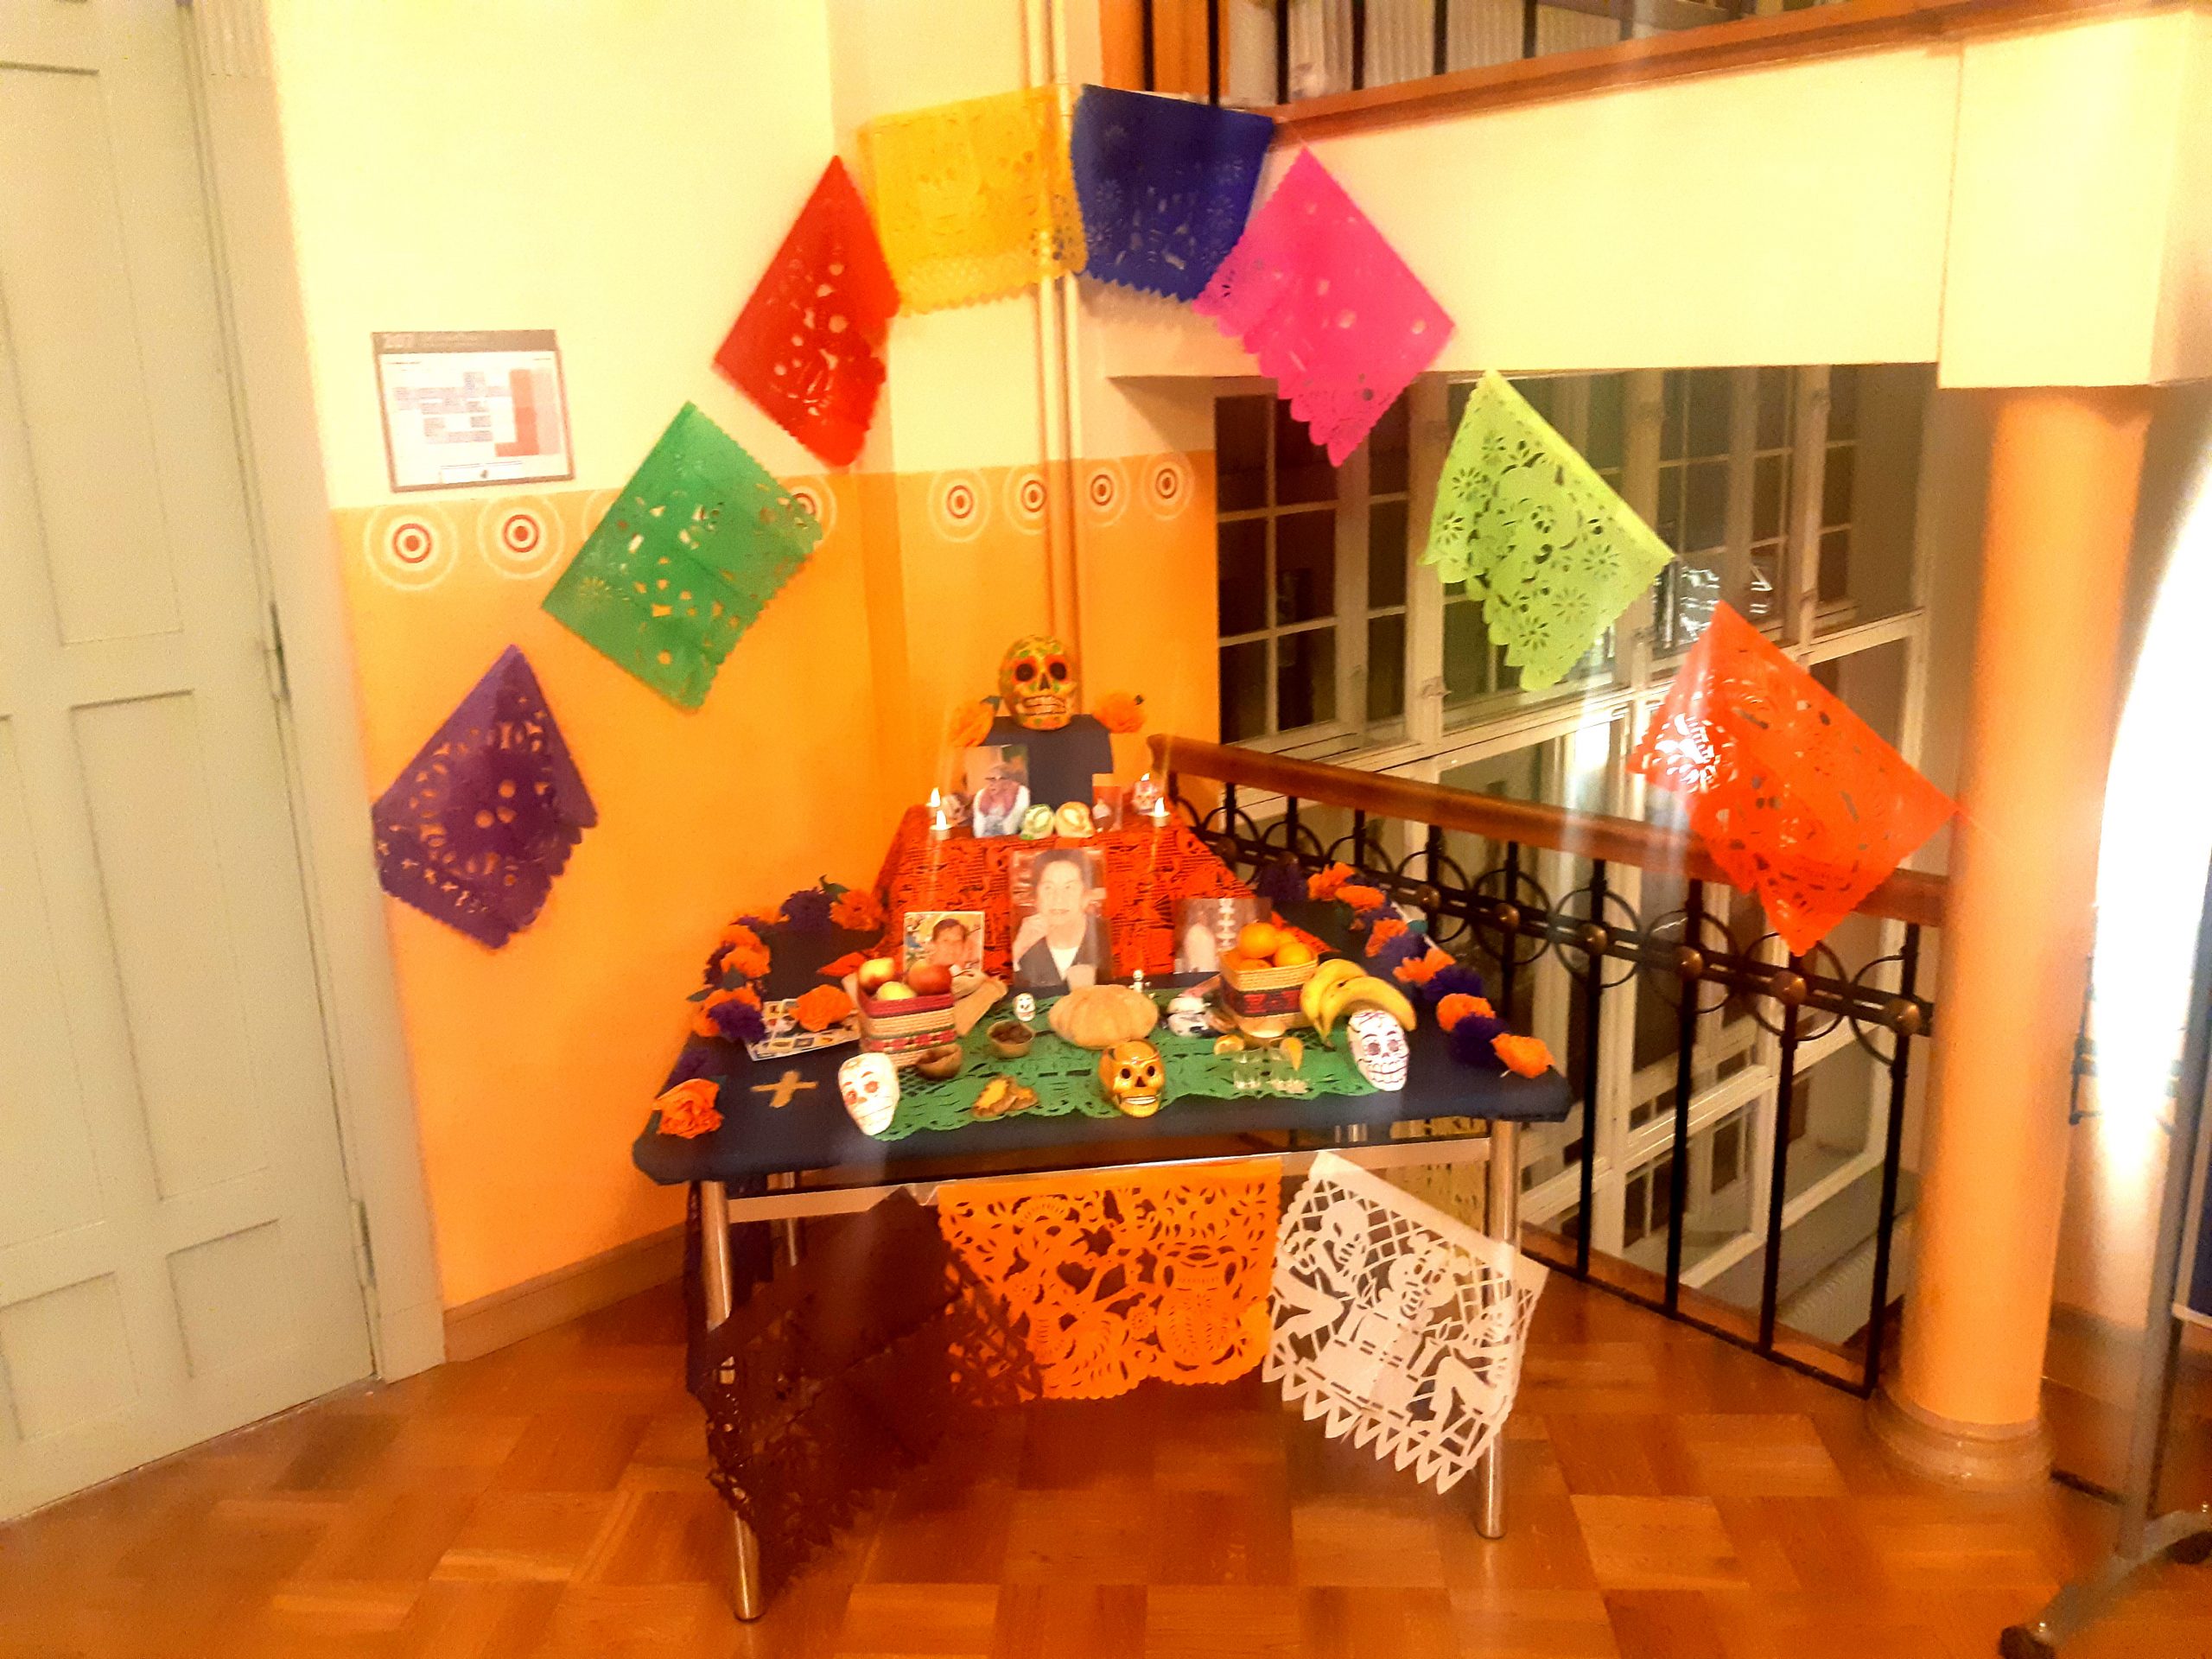 An altar for the Mexican Day of the Dead.